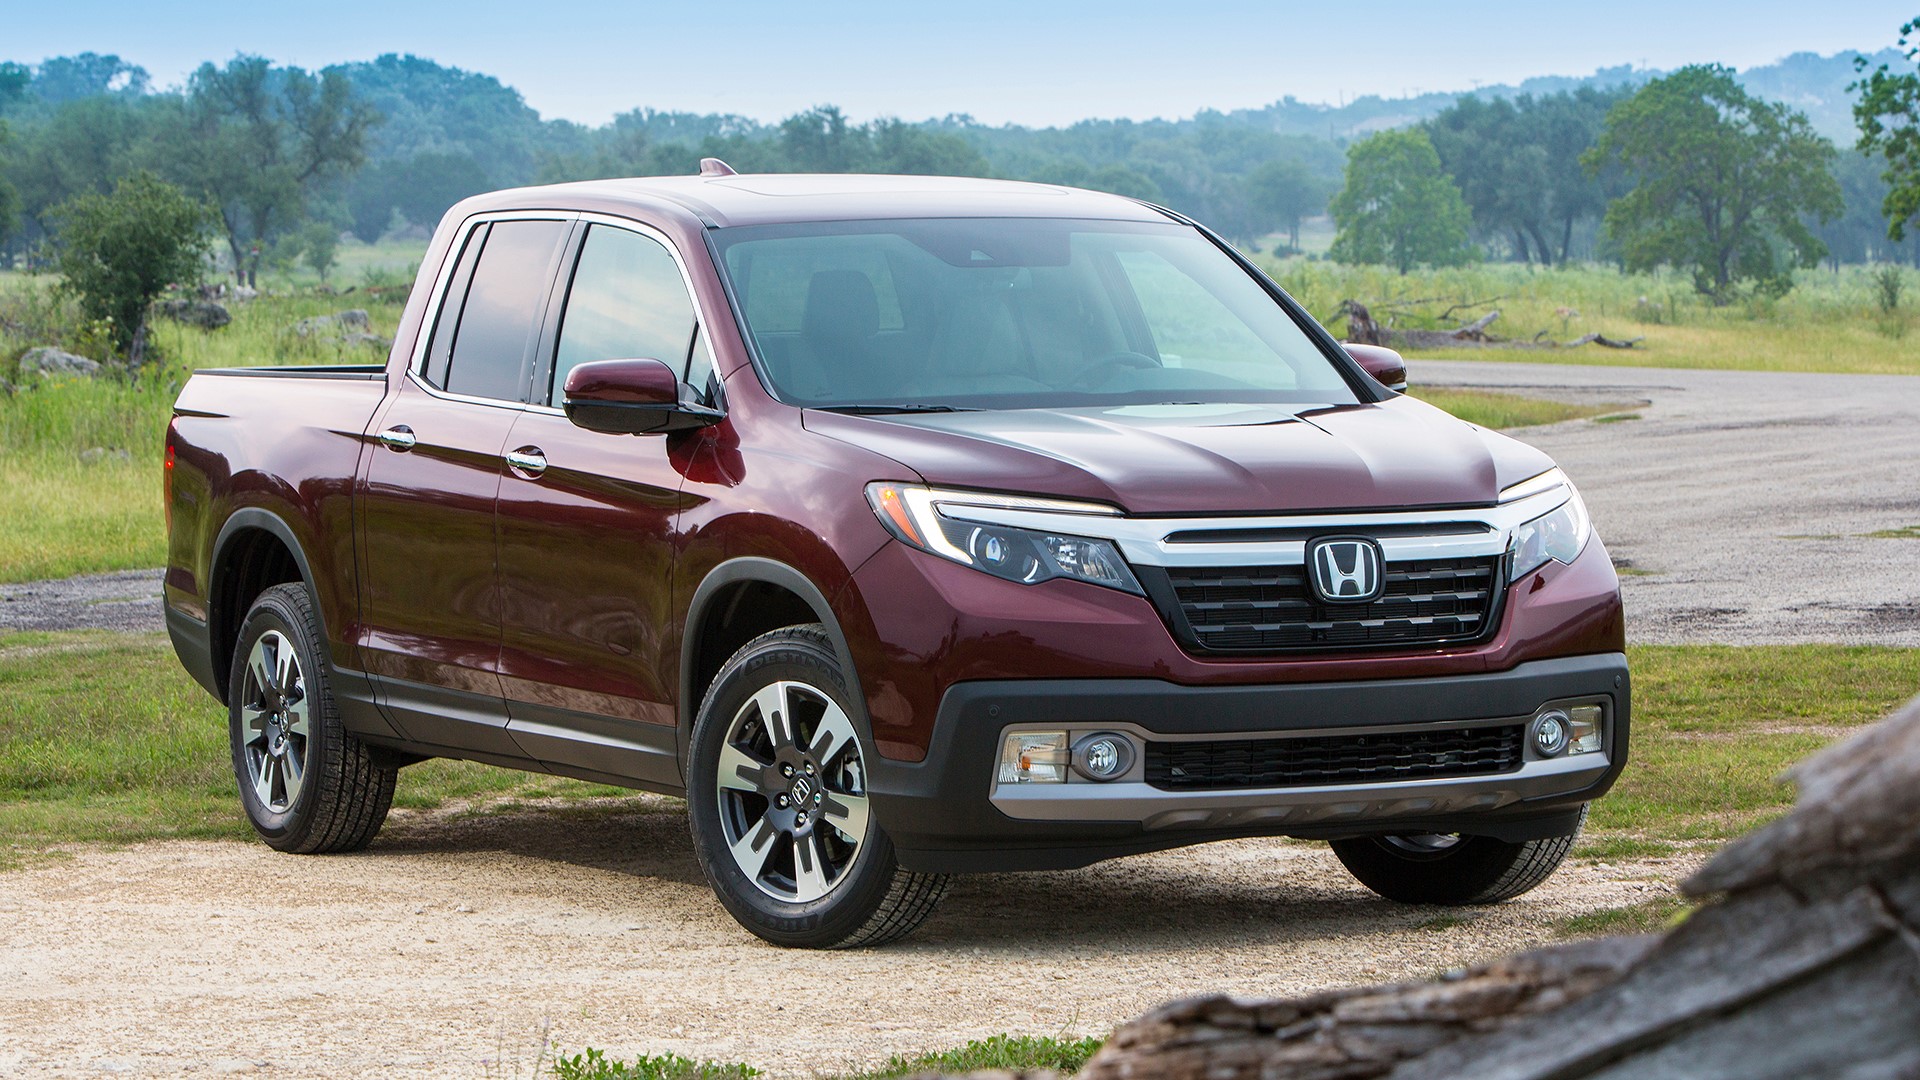 Honda announced it is recalling 106,000 Ridgeline pickups from model years 2017-2019 because sulfuric acid in car washes could ultimately lead to a fuel leak.